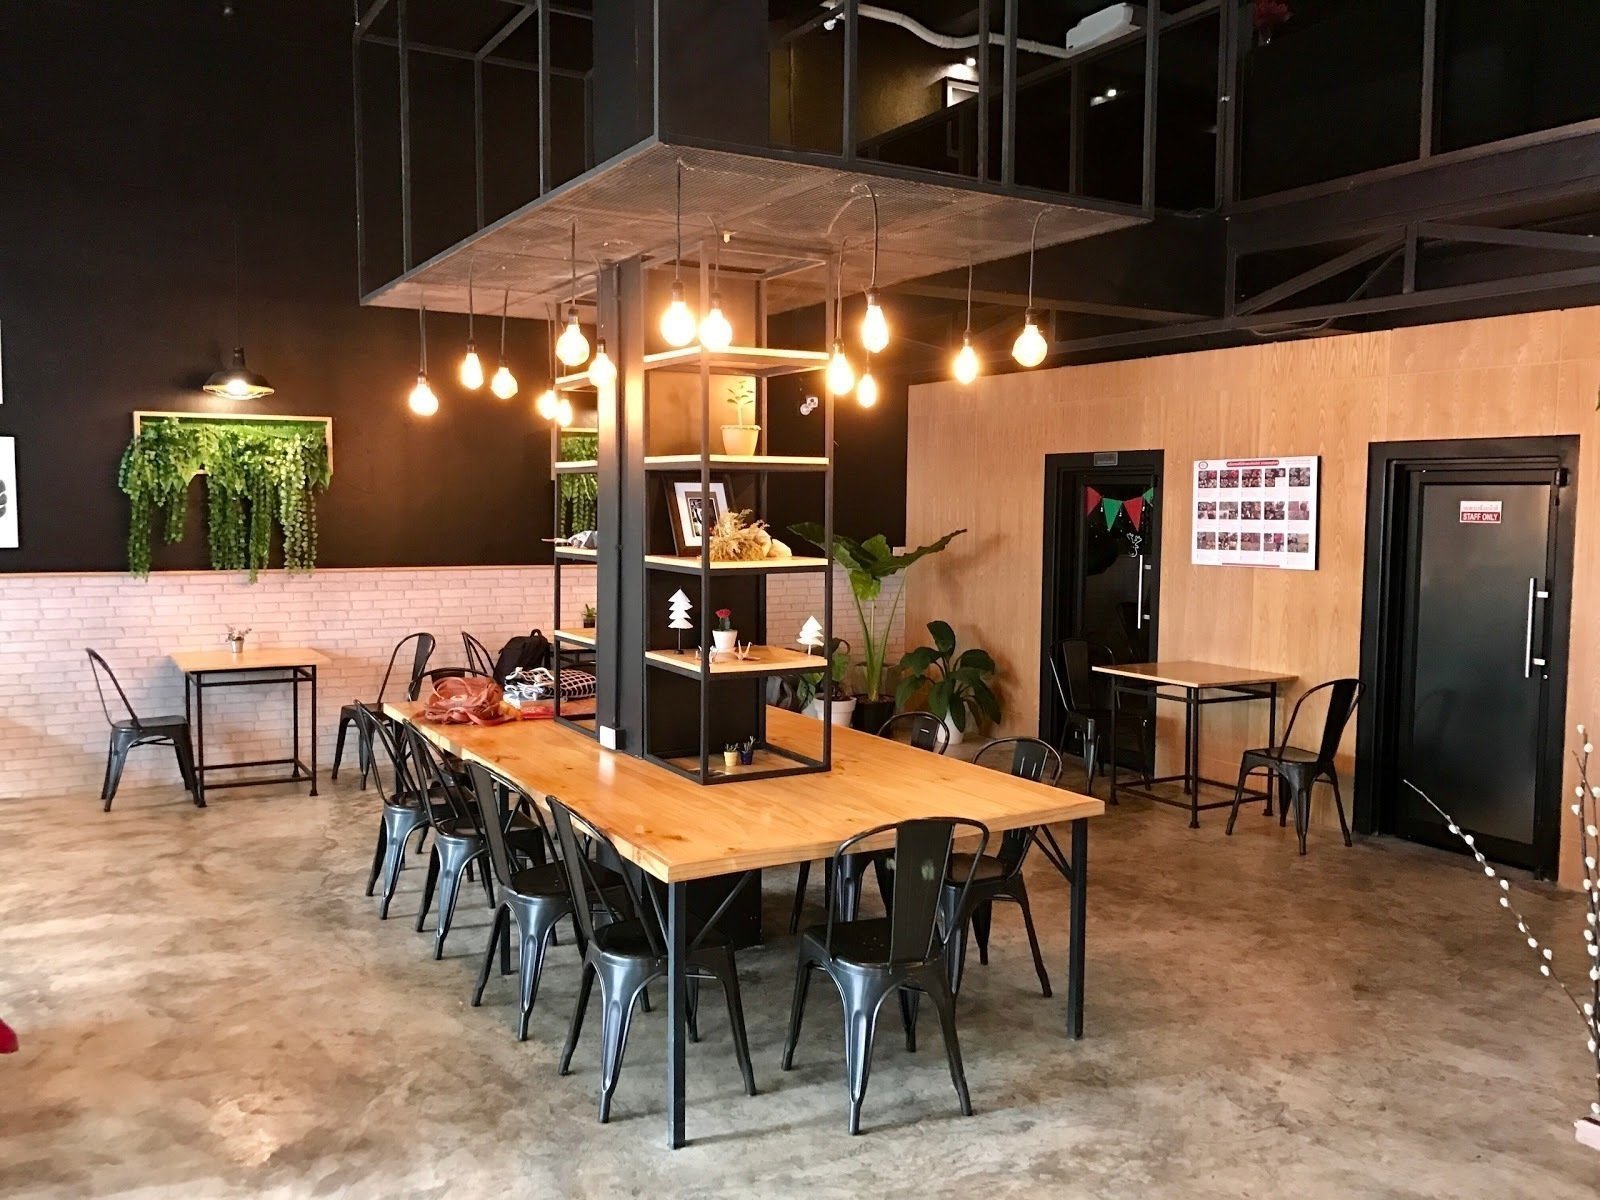 <span class="translation_missing" title="translation missing: en.meta.location_title, location_name: Min Cafe, city: Chiang Mai">Location Title</span>